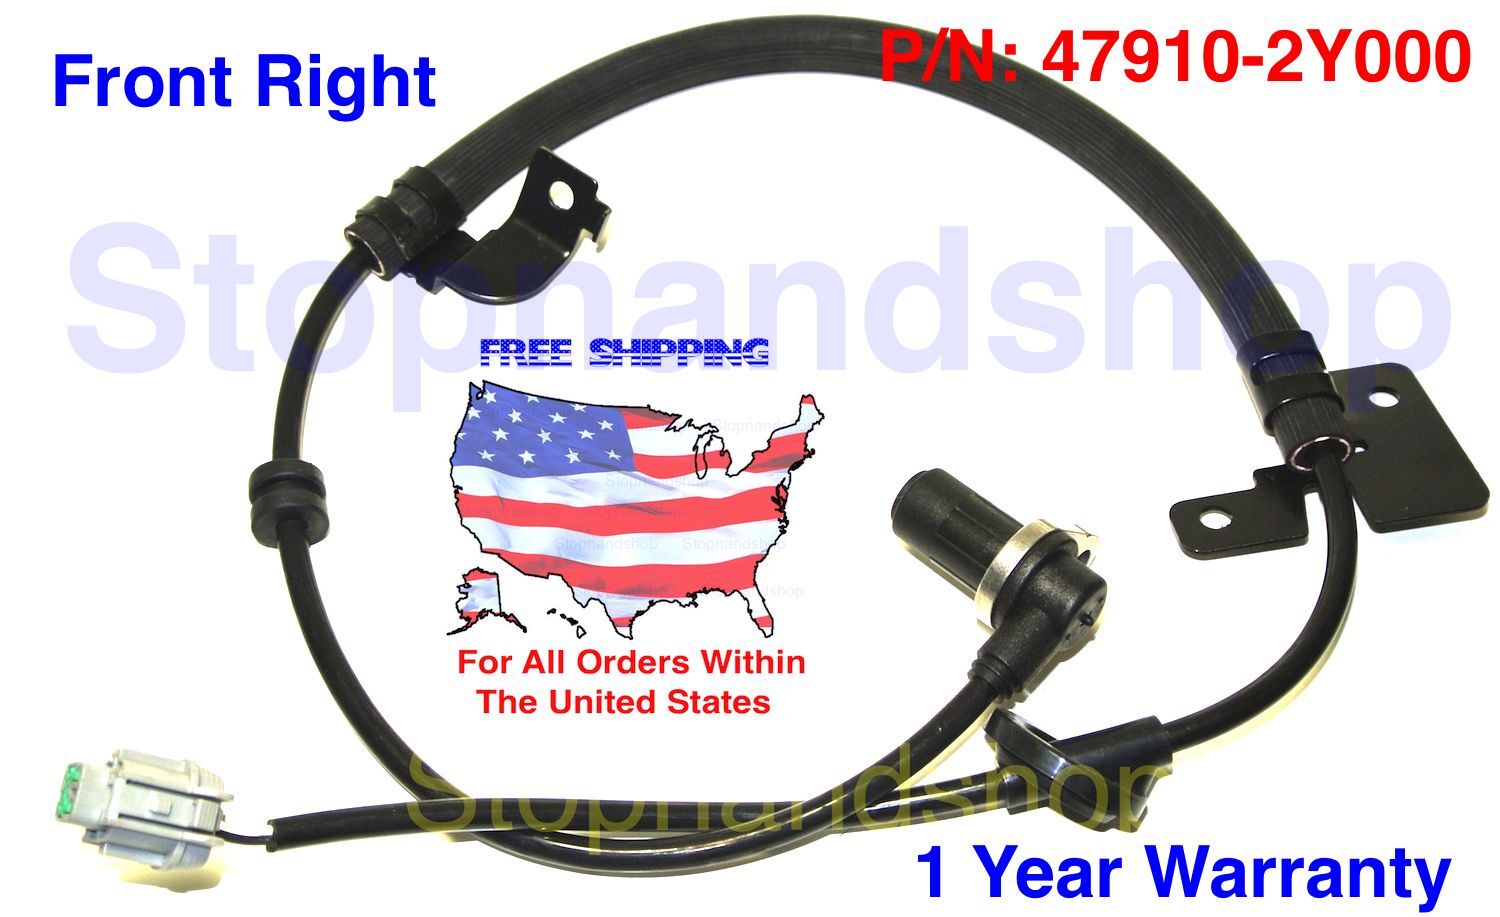 NEW ABS WHEEL SPEED SENSOR fits Nissan i30 Maxima Front Right Passenger Side